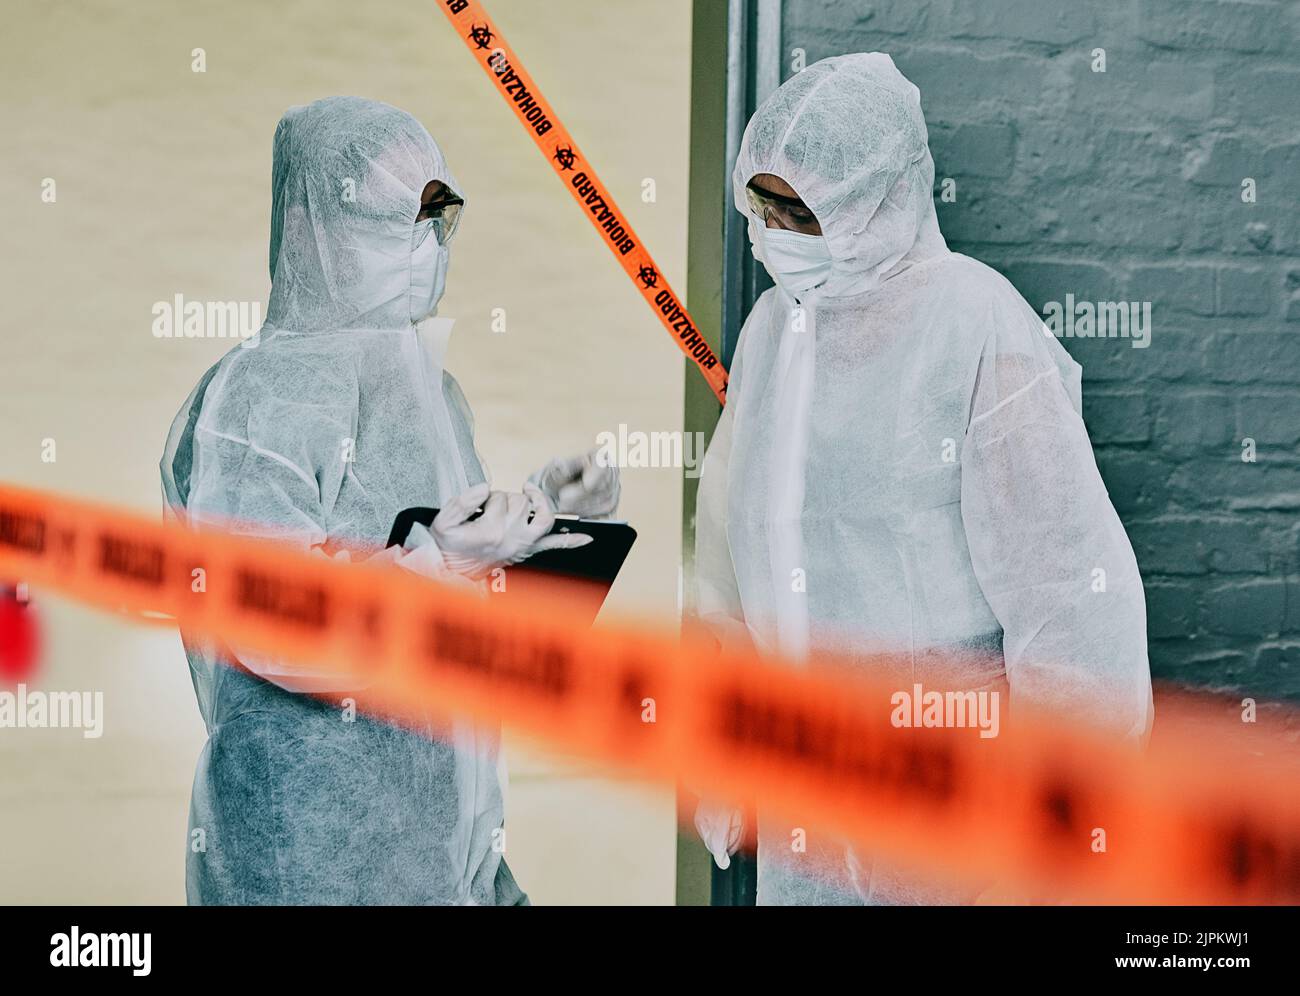 Forensic investigators collecting evidence at a murder scene in a building with barrier tape. Criminal researchers investigating a crime site and Stock Photo